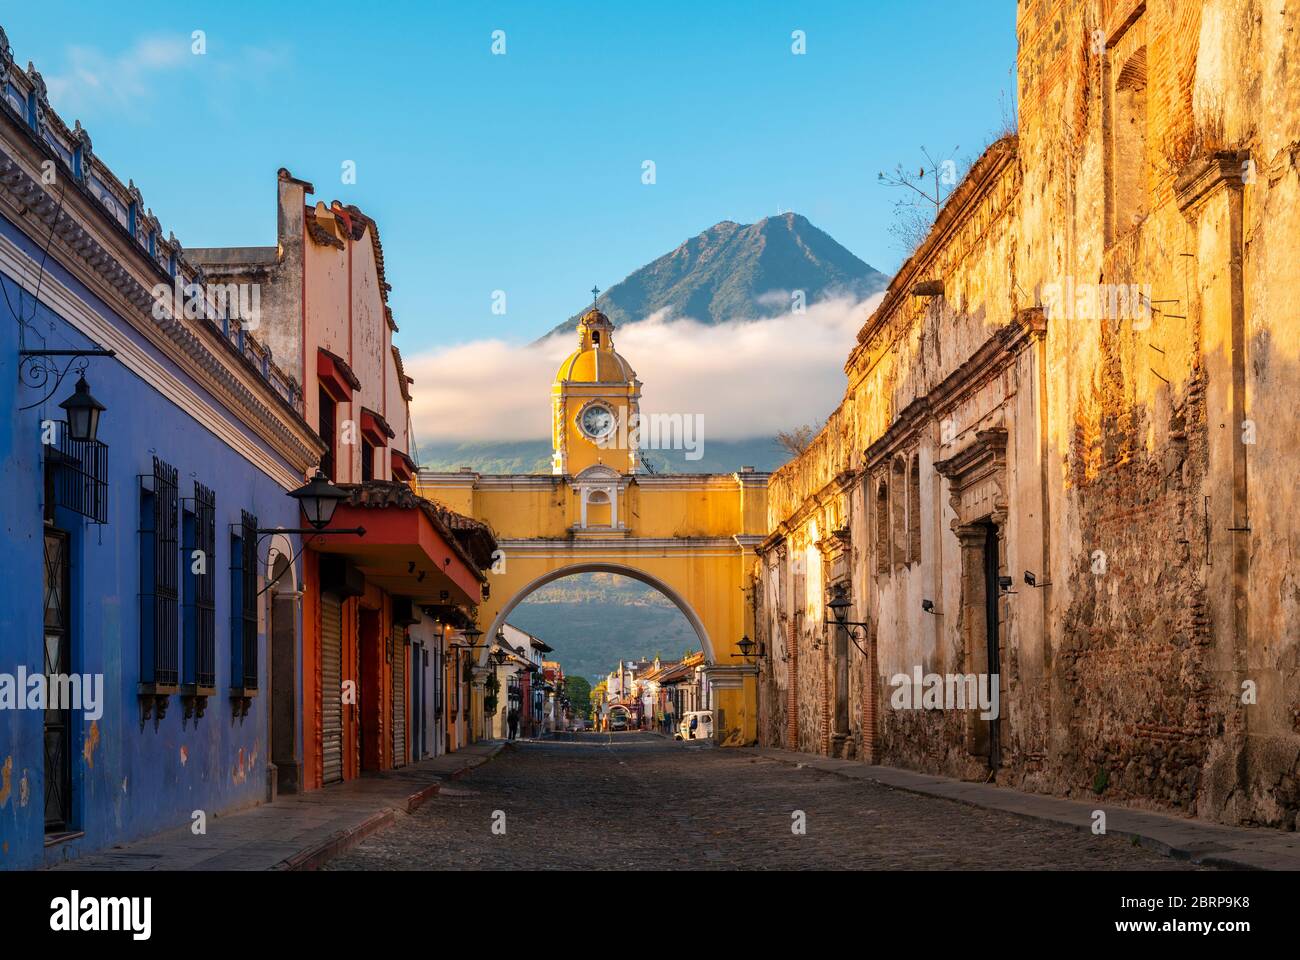 The Santa Catalina Arch in the Main Street of Antigua City without people and the Agua Volcano in the background at sunrise, Guatemala. Stock Photo